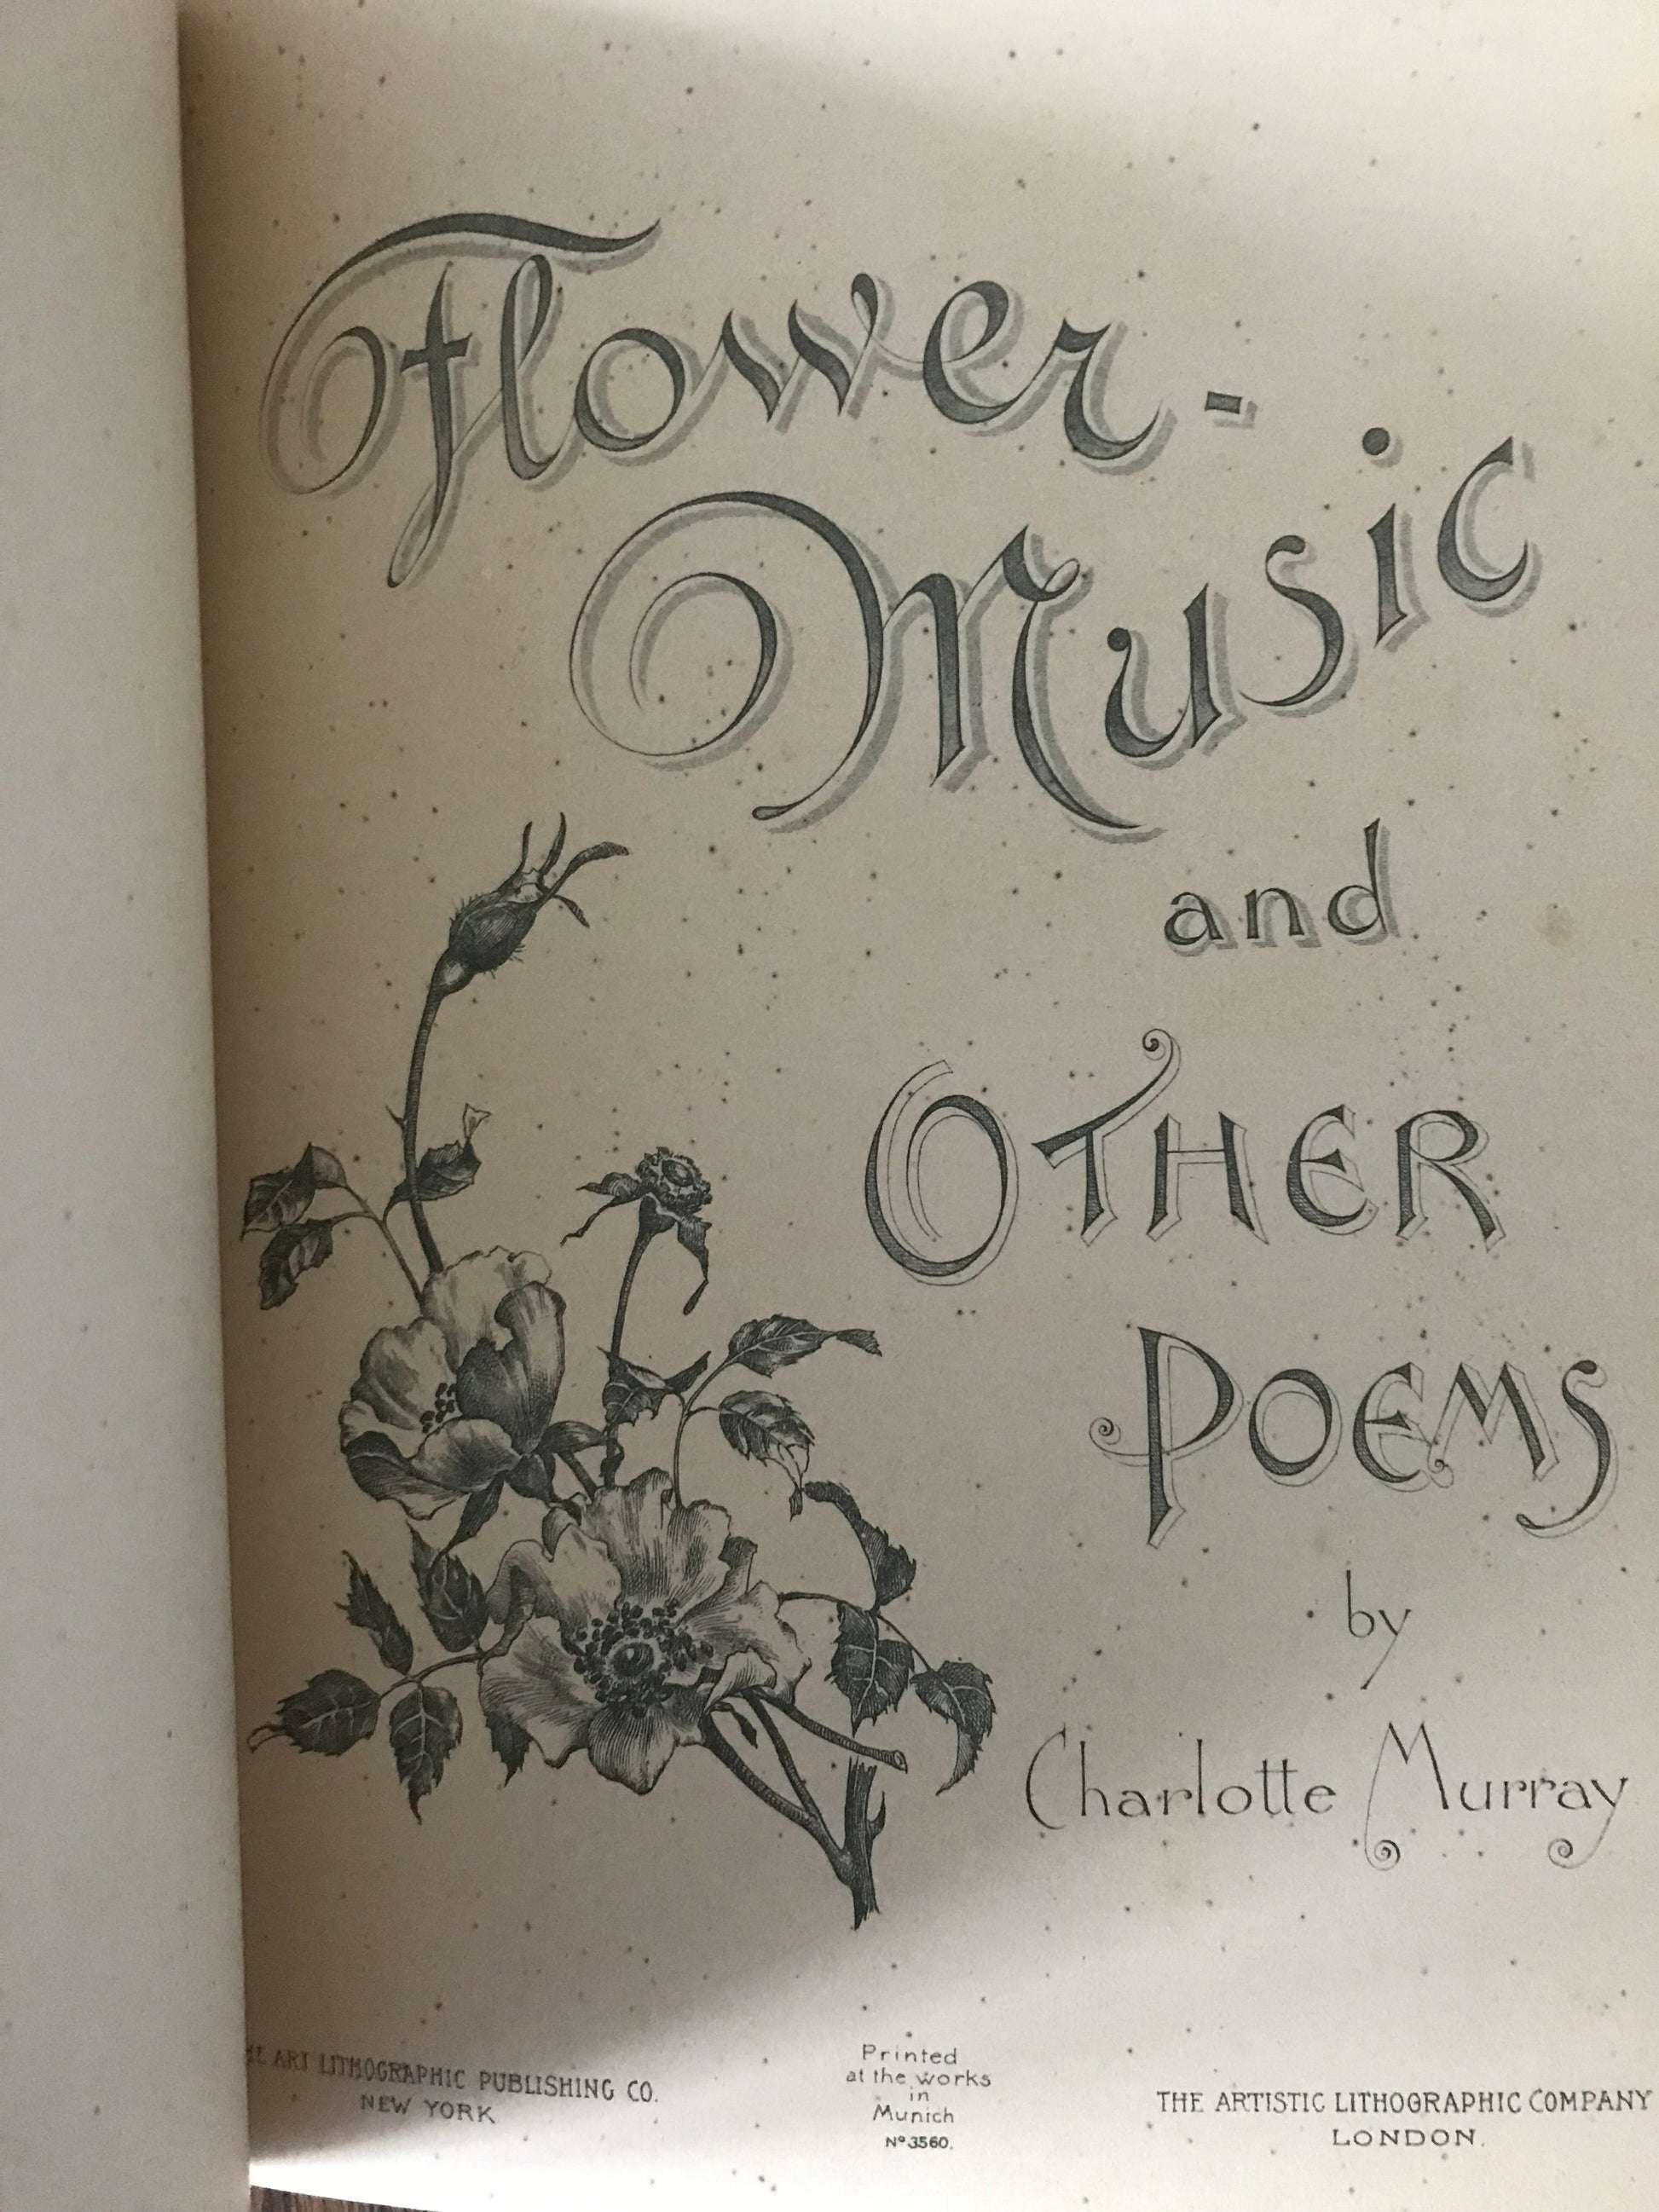 FLOWER - MUSIC AND OTHER POEMS BY CHARLOTTE MURRAY BooksCardsNBikes